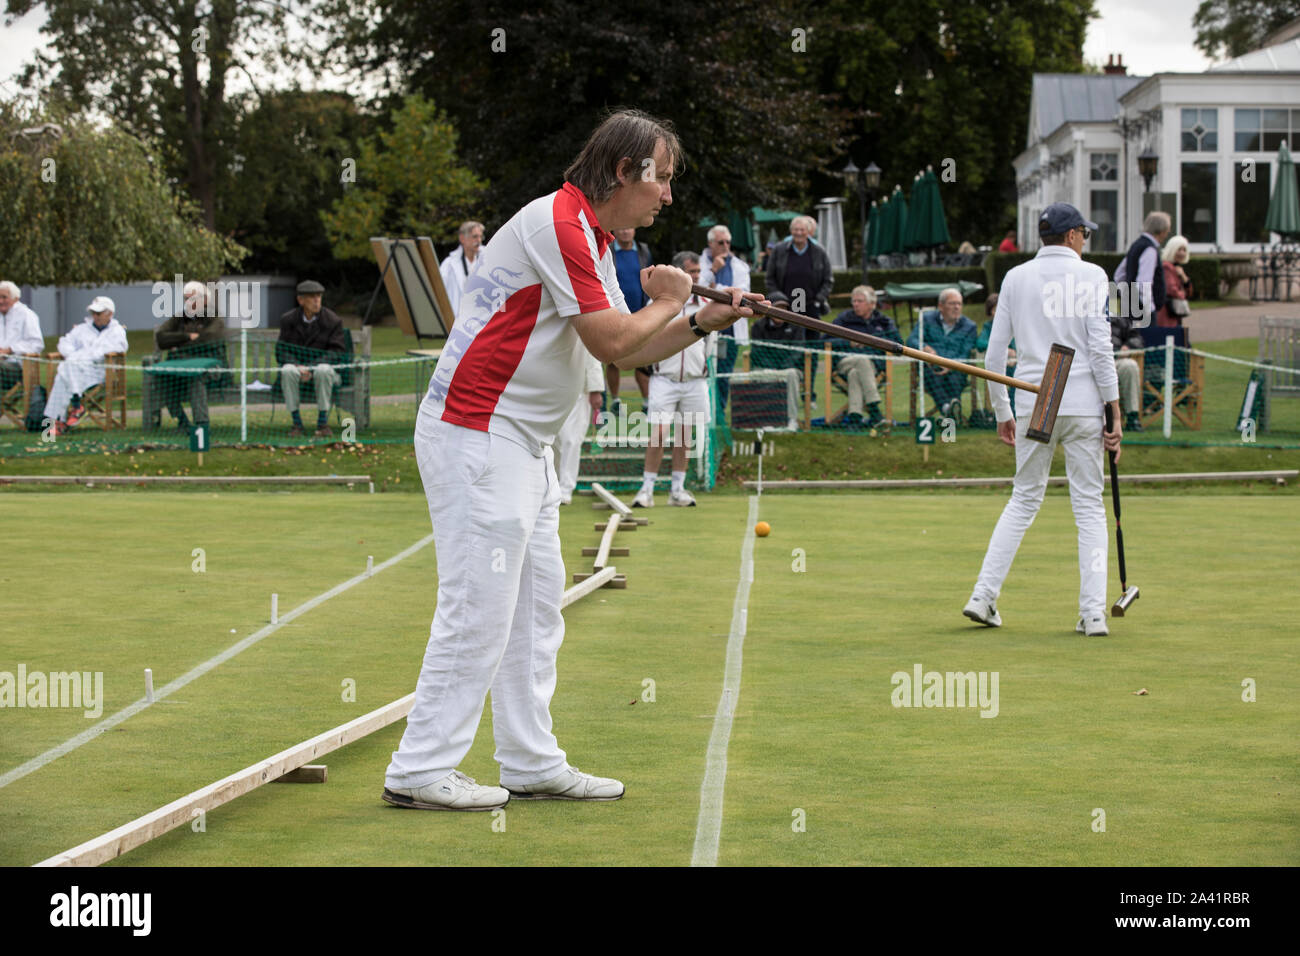 James Death at Phyllis Court V Nottingham in the National Golf Croquet Inter-Club Championship Final at Phyllis Court Club, Henley on Thames, UK Stock Photo